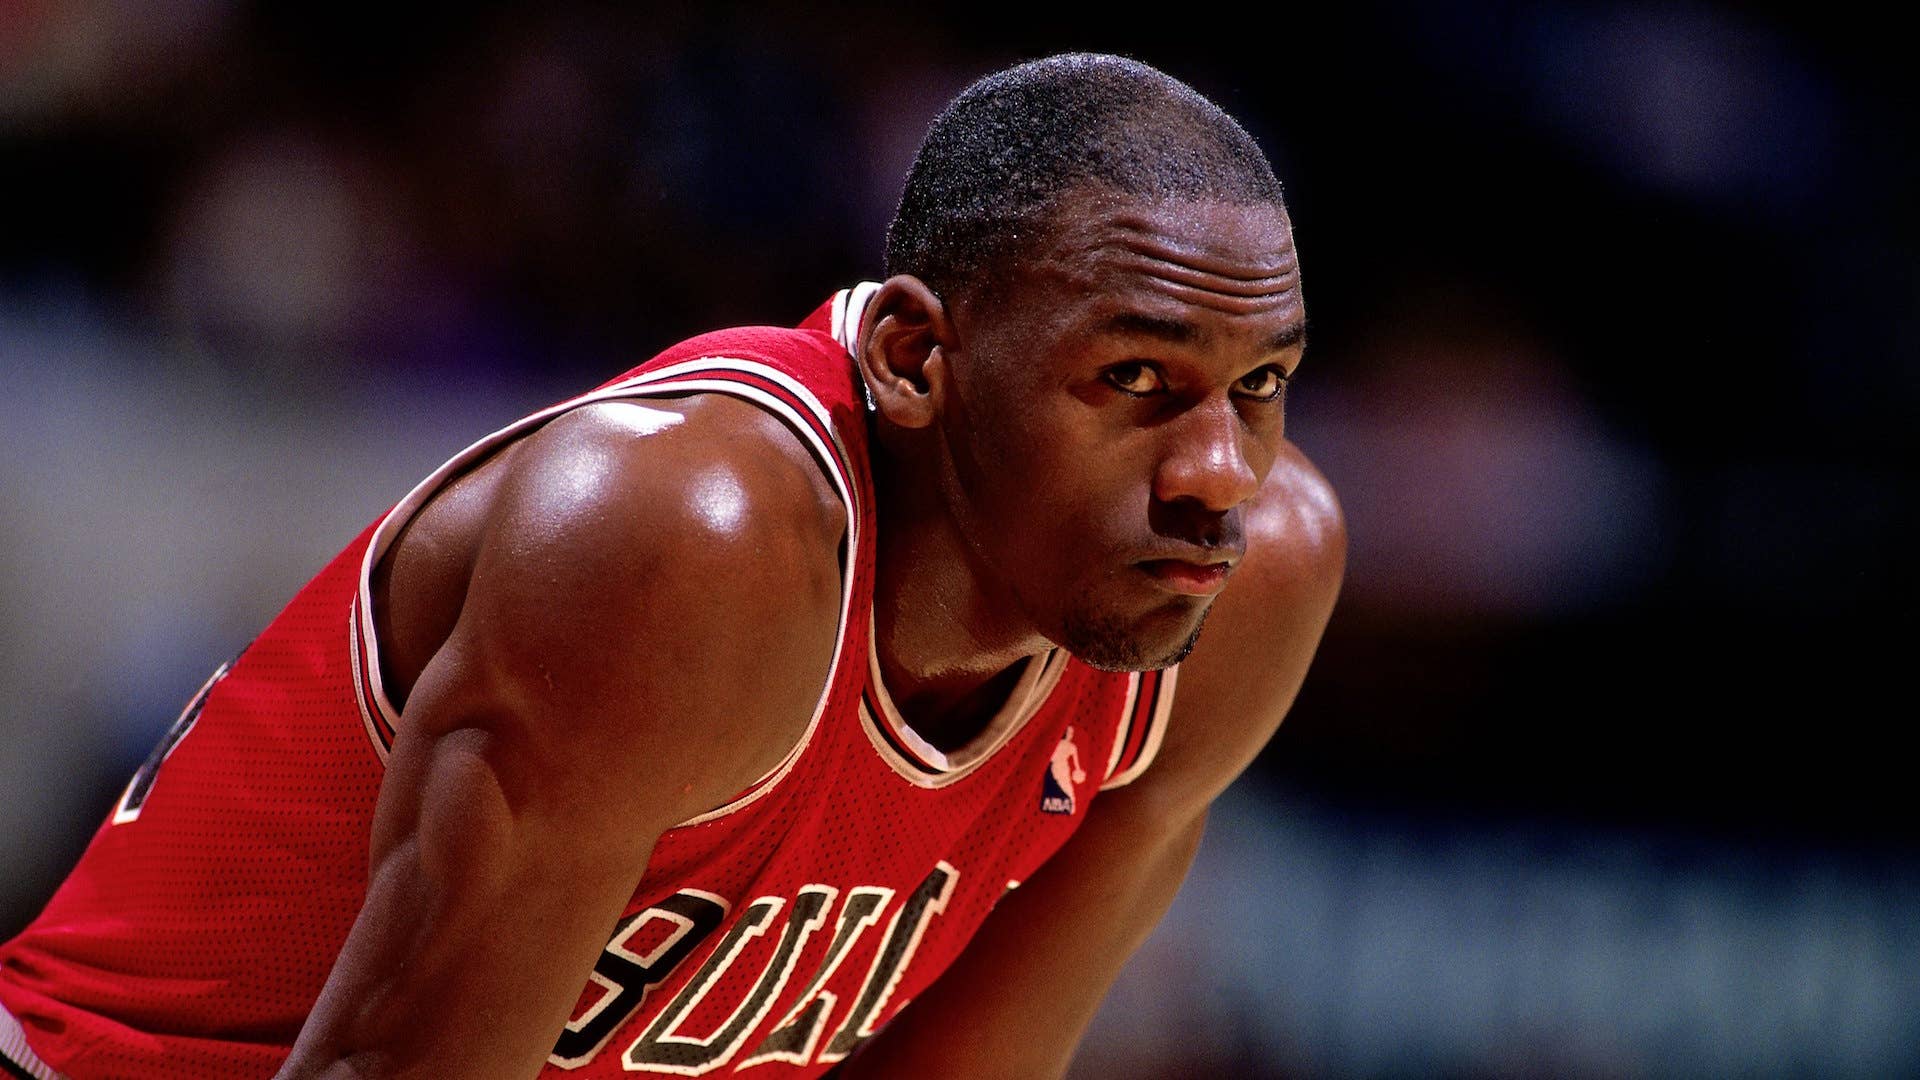 Michael Jordan #23 of the Chicago Bulls looks on durng a NBA game.